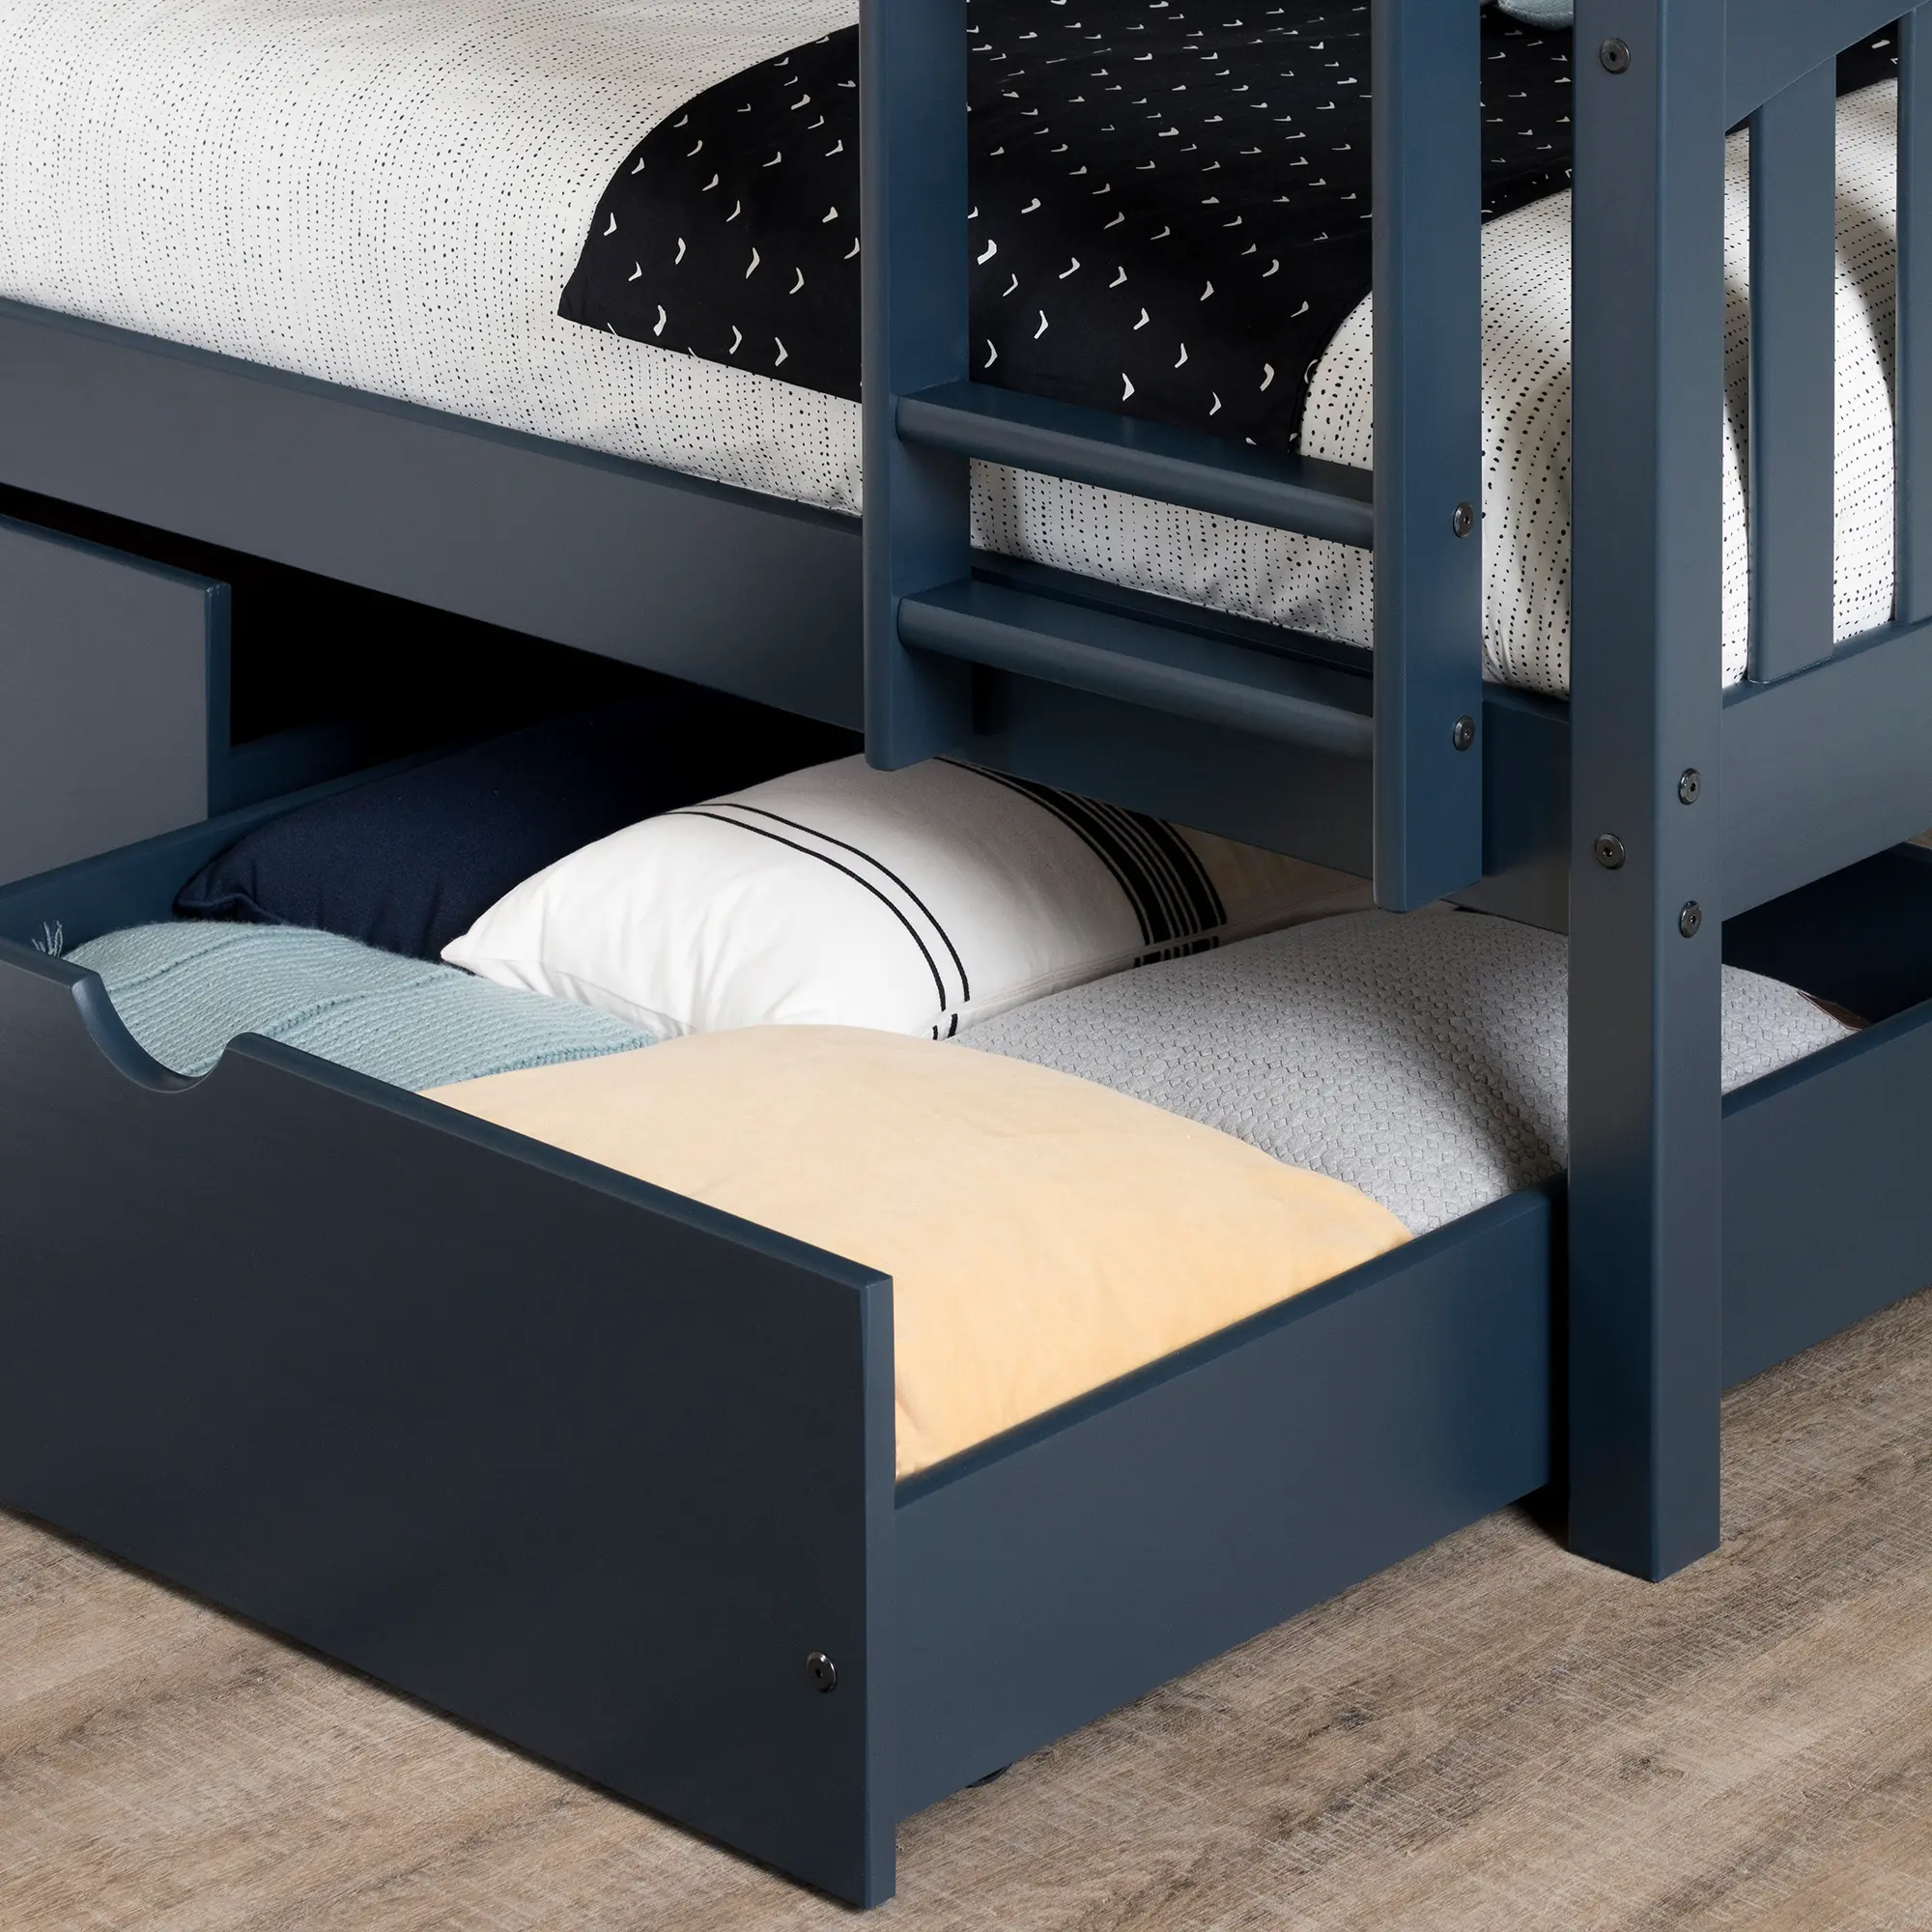 Asten Navy Blue Twin Bunk Beds with Storage Drawers